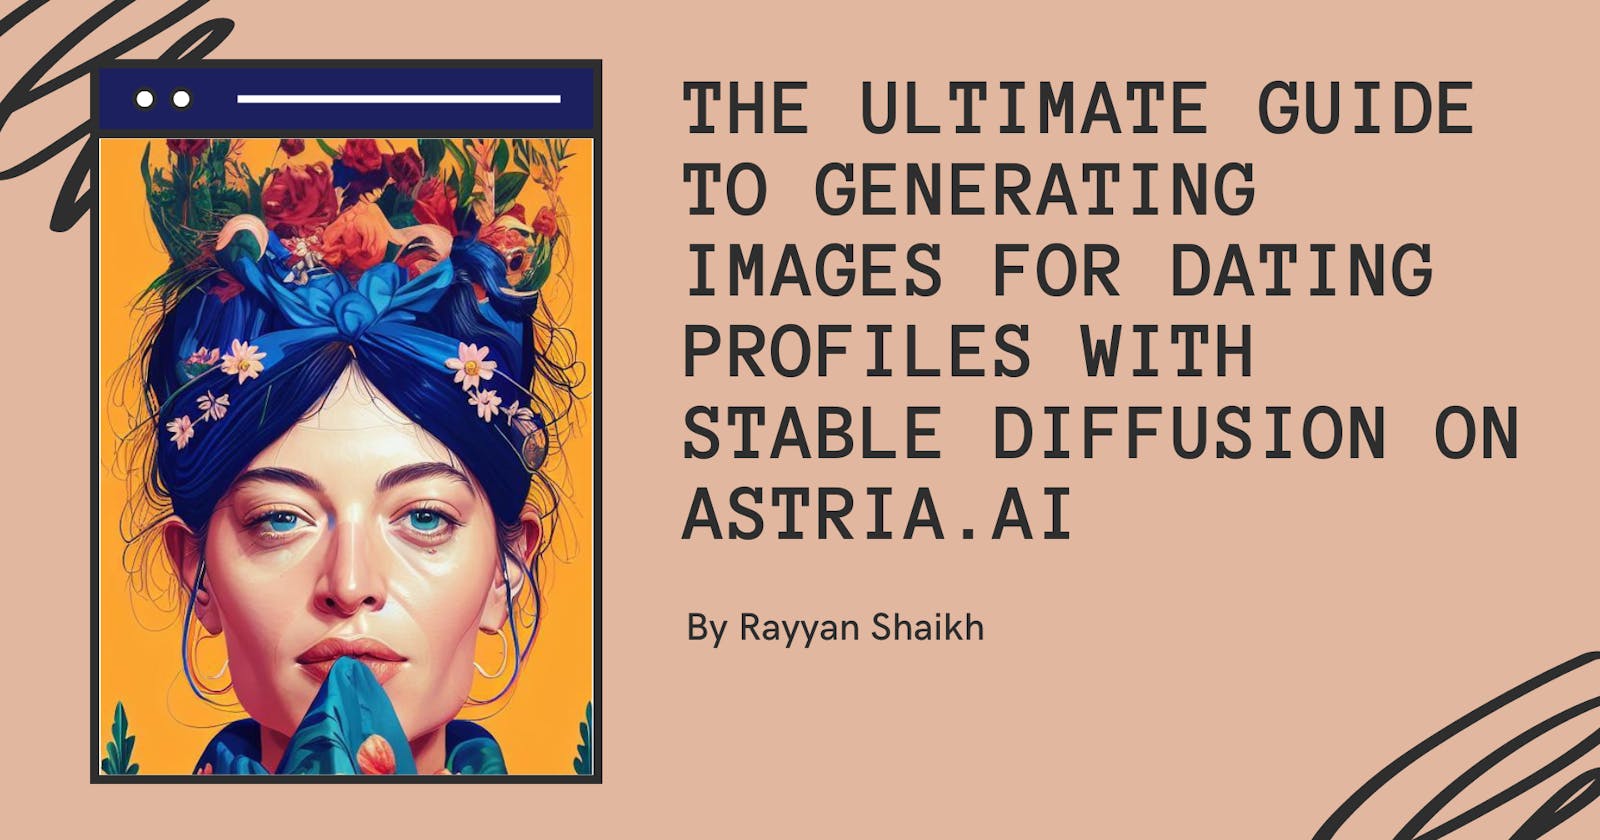 The Ultimate Guide to Generating Images for Dating Profiles with Stable Diffusion on Astria.ai